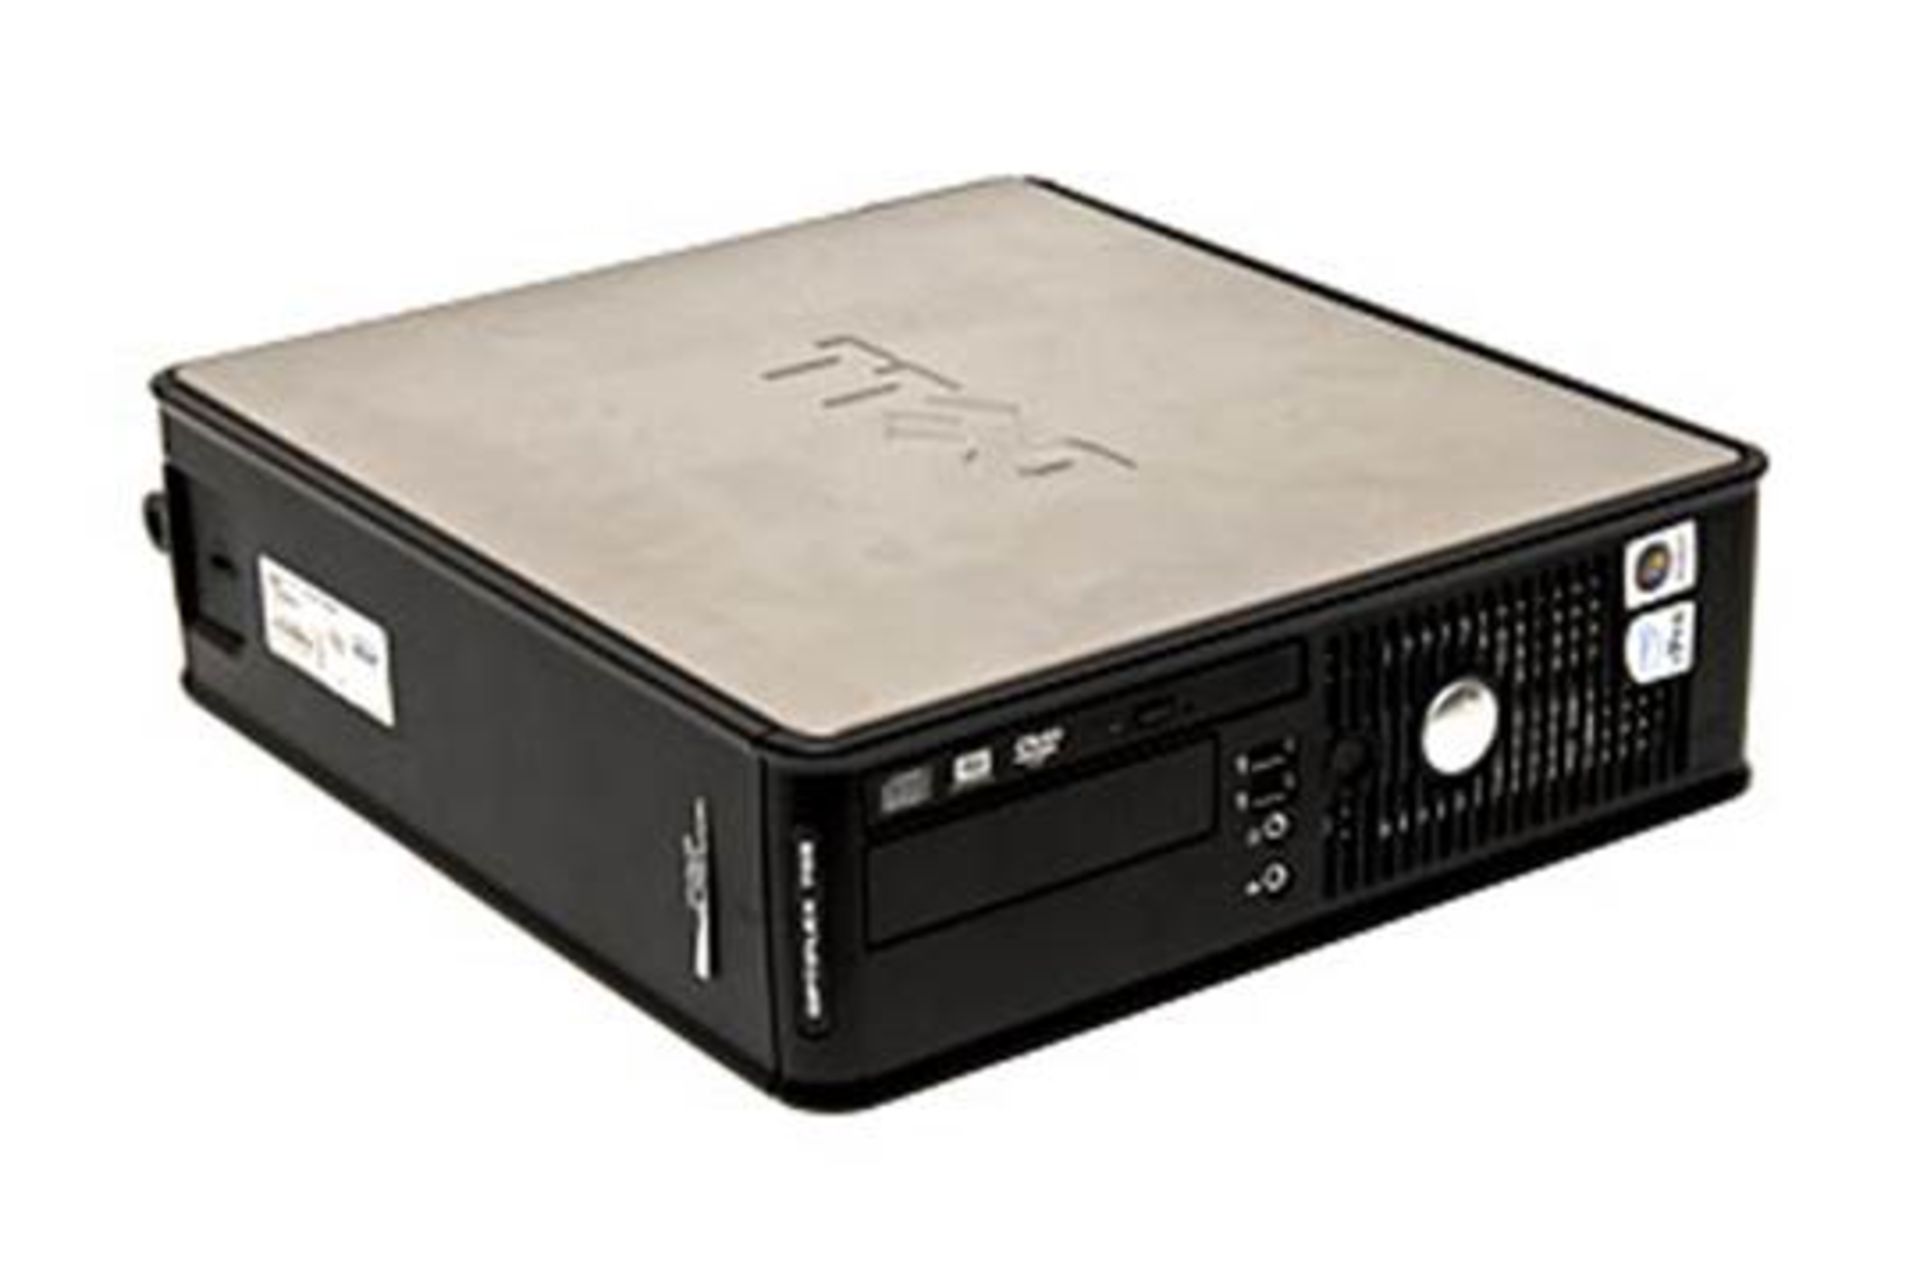 Dell Optiplex 755 Pentium Dual 2.2Ghz 2Gb Ram DVD/CD-Rom USFF PC - No HDD - With PSU - Image 4 of 4